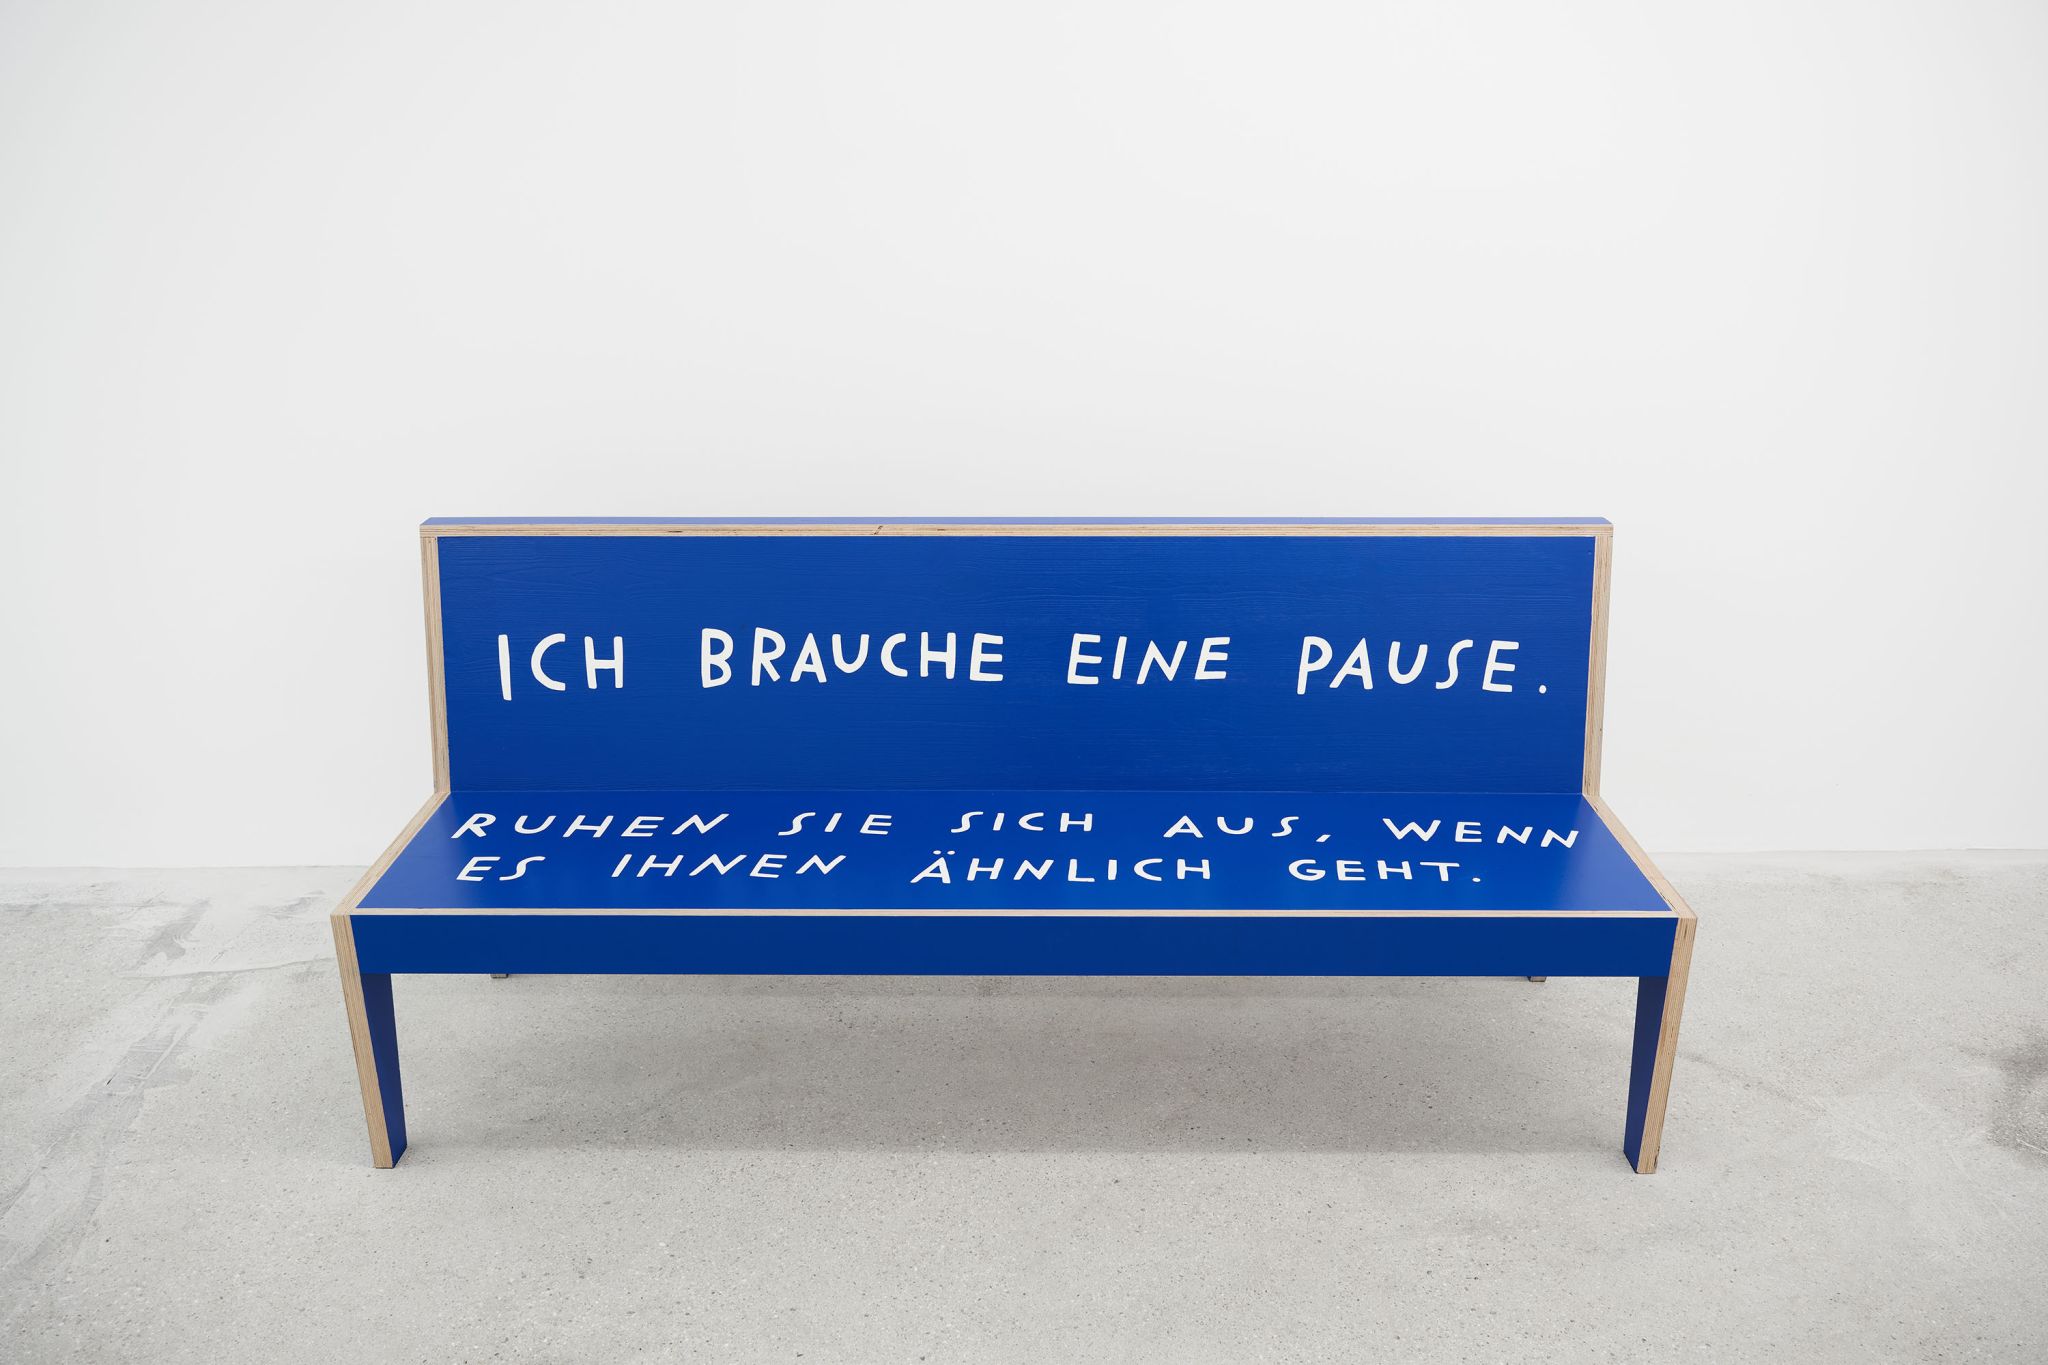 Finnegan Shannon, o you want us here or not (MMK) – Bench 6, 2021, Plywood, paint, 90 ⁠× ⁠200 ⁠× ⁠55 ⁠⁠cm, Image description: A blue bench is standing in an exhibition room. It has white letters on it, that read “I need a break. Rest here if you agree” in German language.